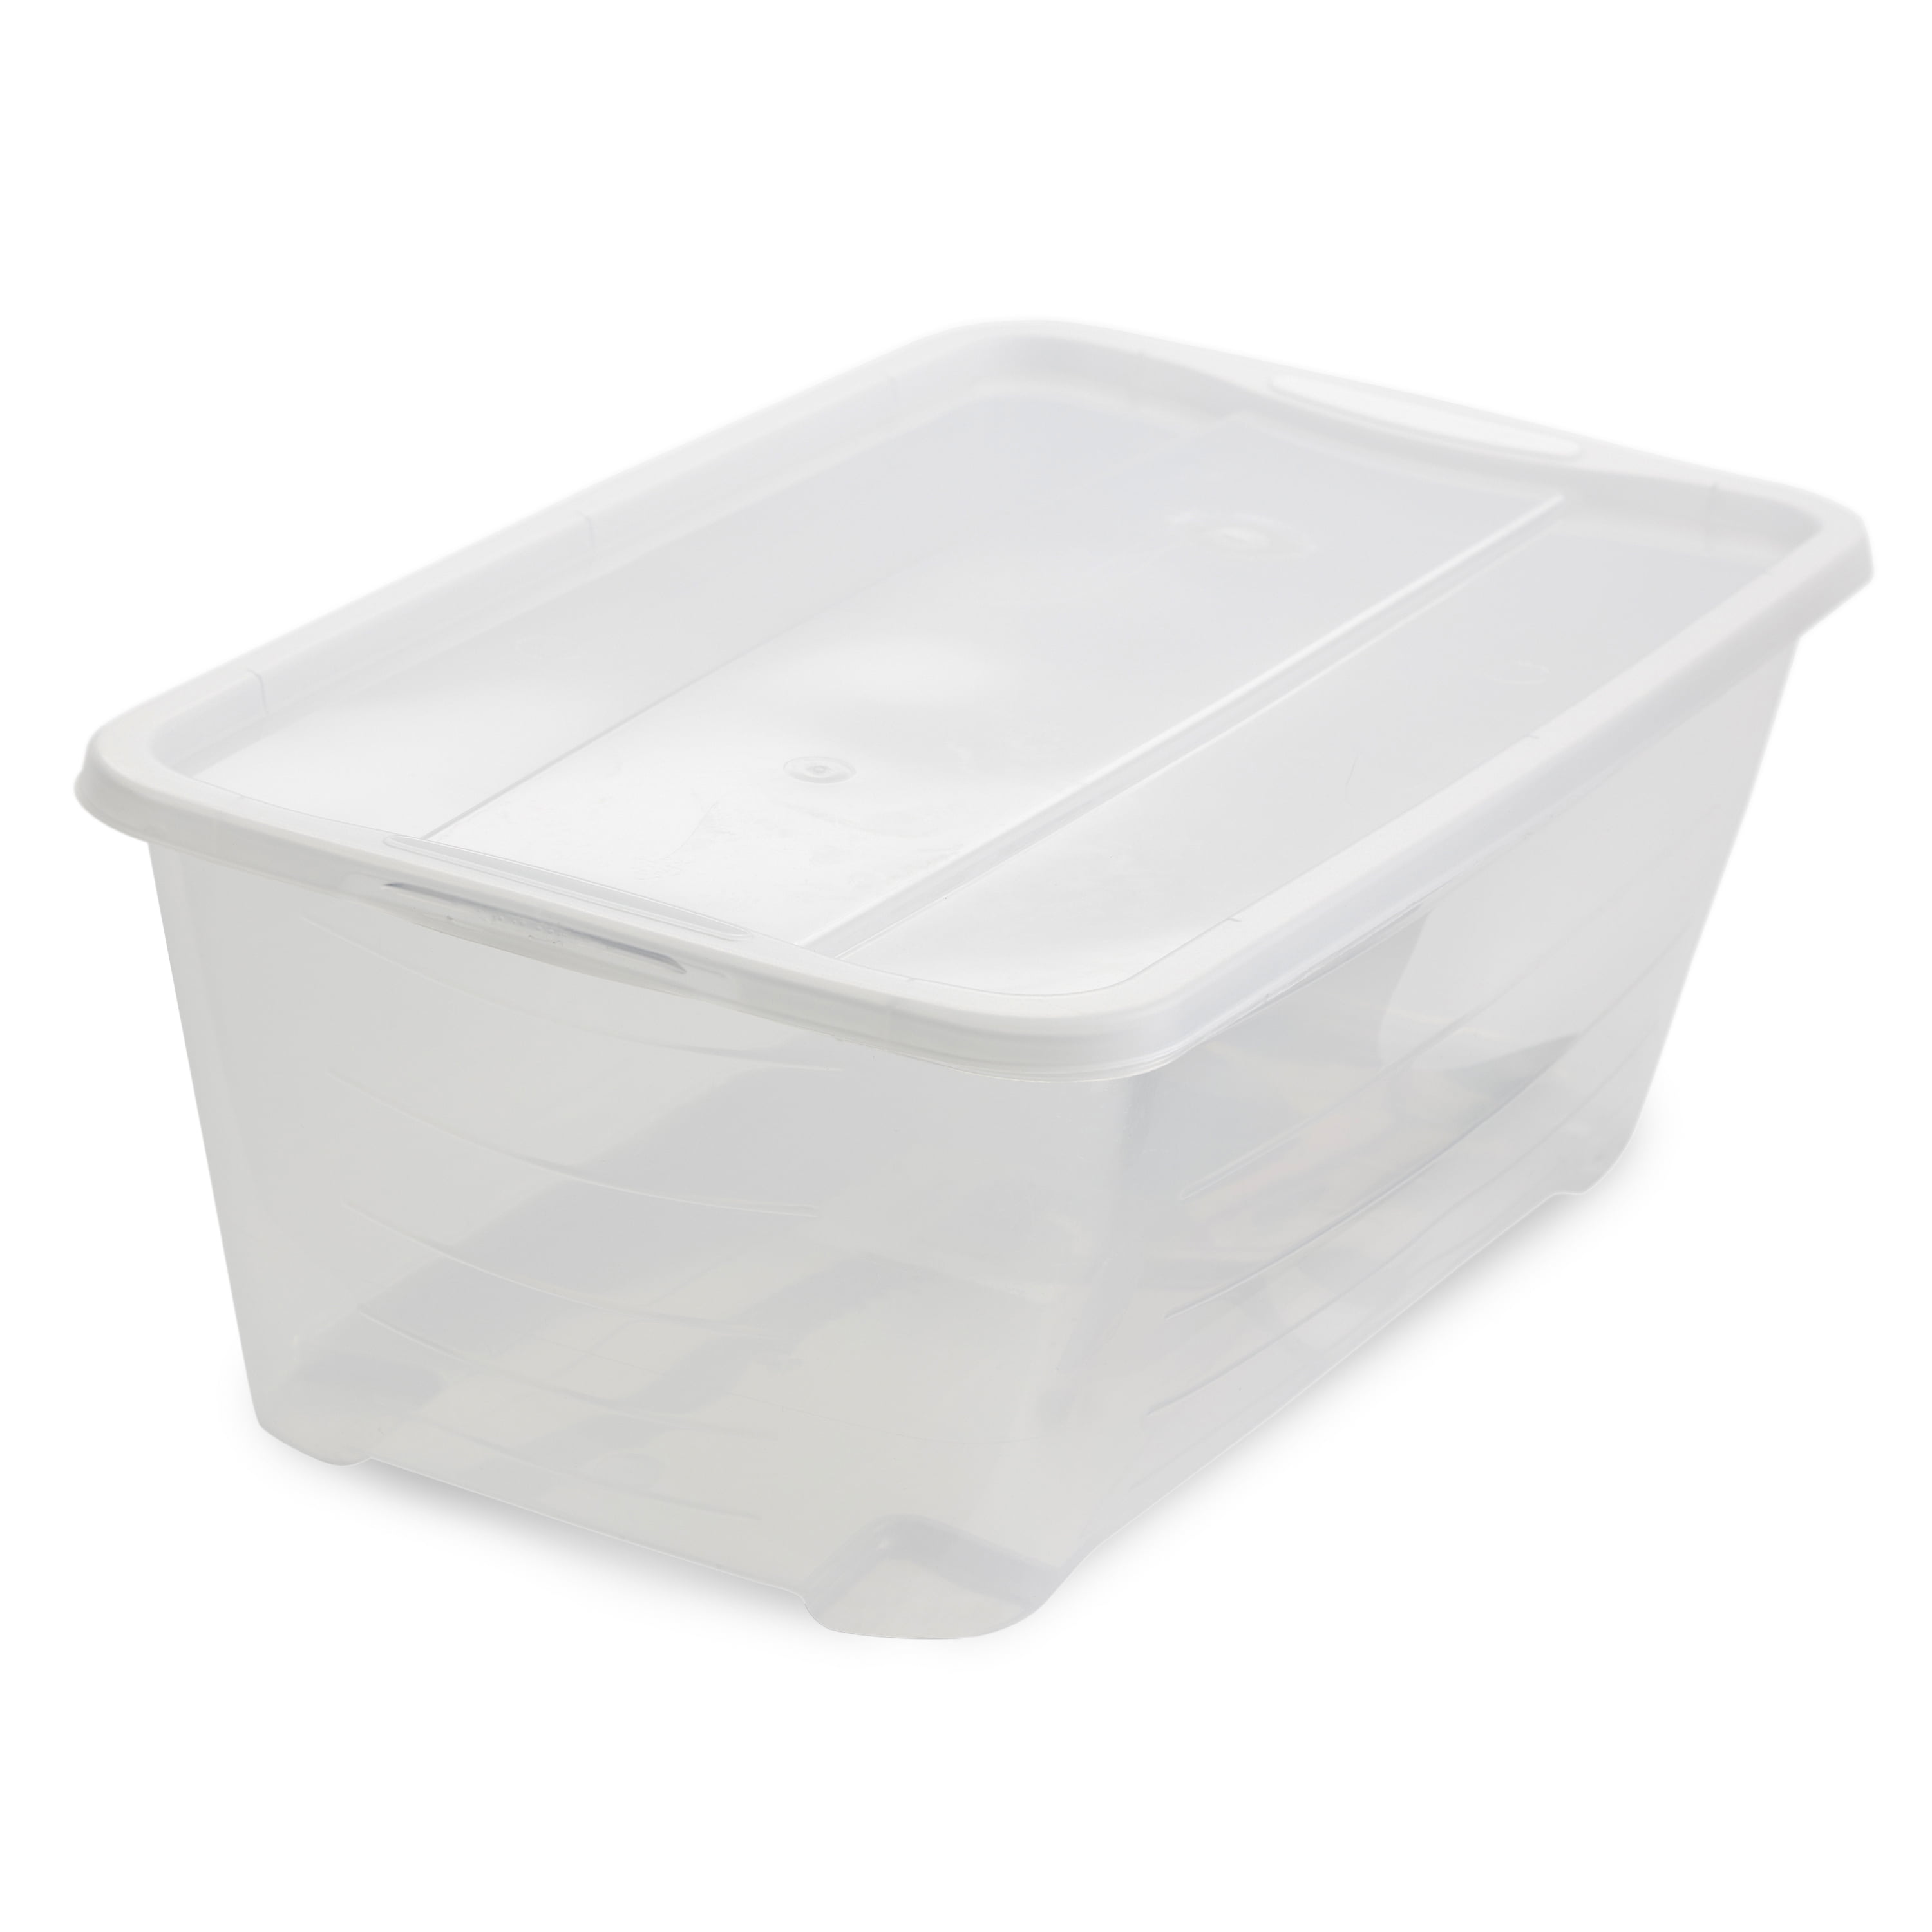 Life Story 14 Quart Clear Stackable Organization Storage Box Container 24 Pack 